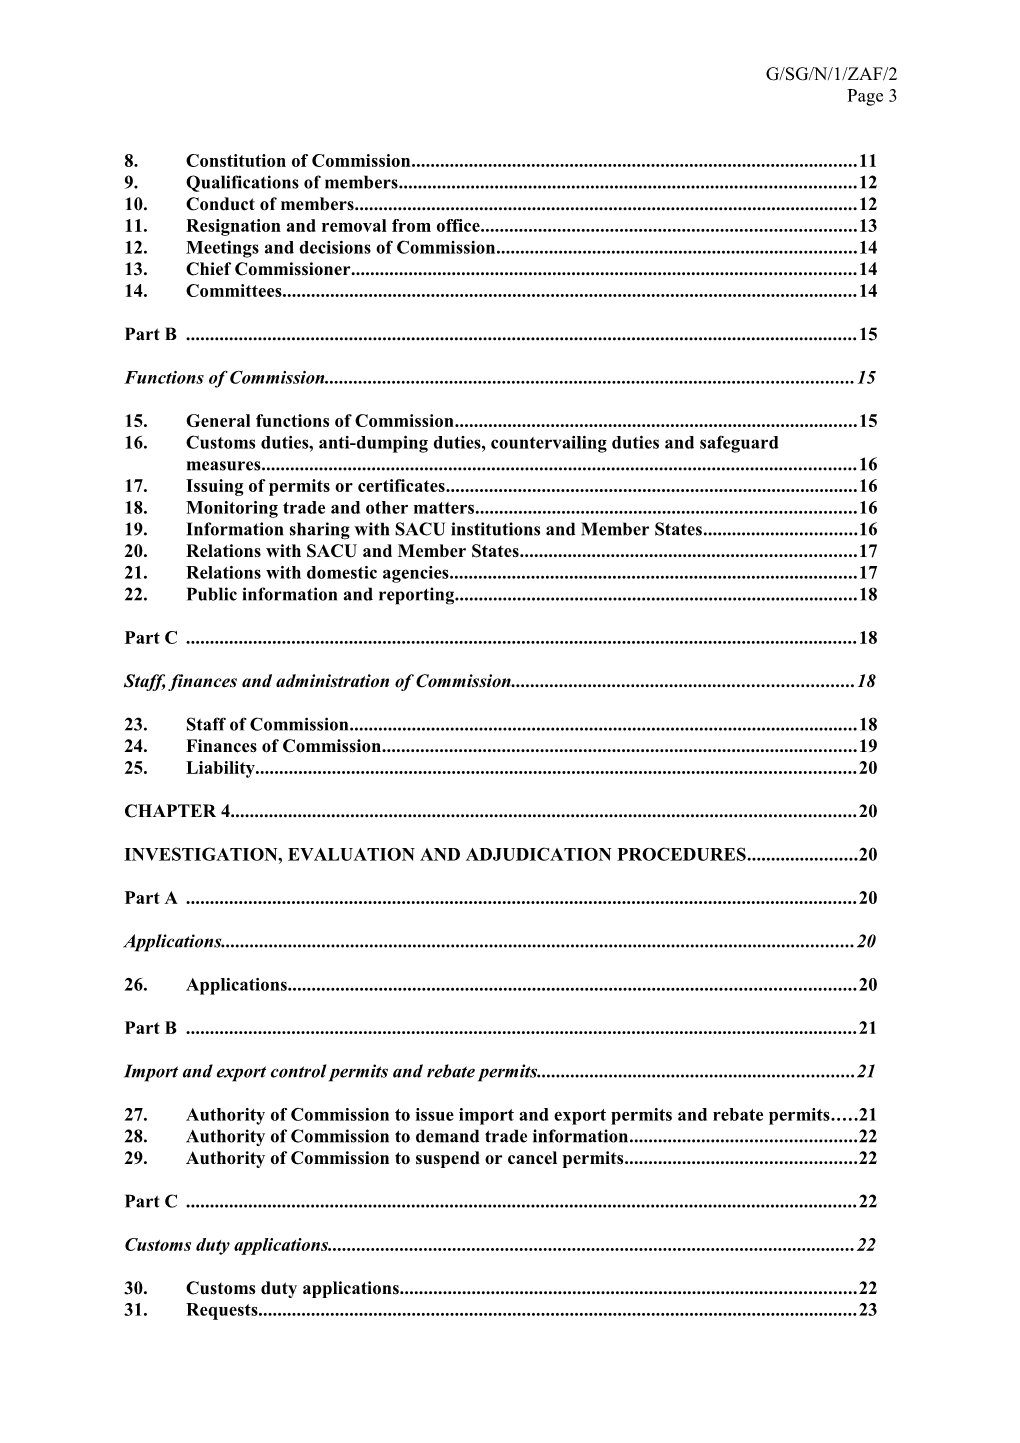 Notifications of Laws, Regulations and Administrative